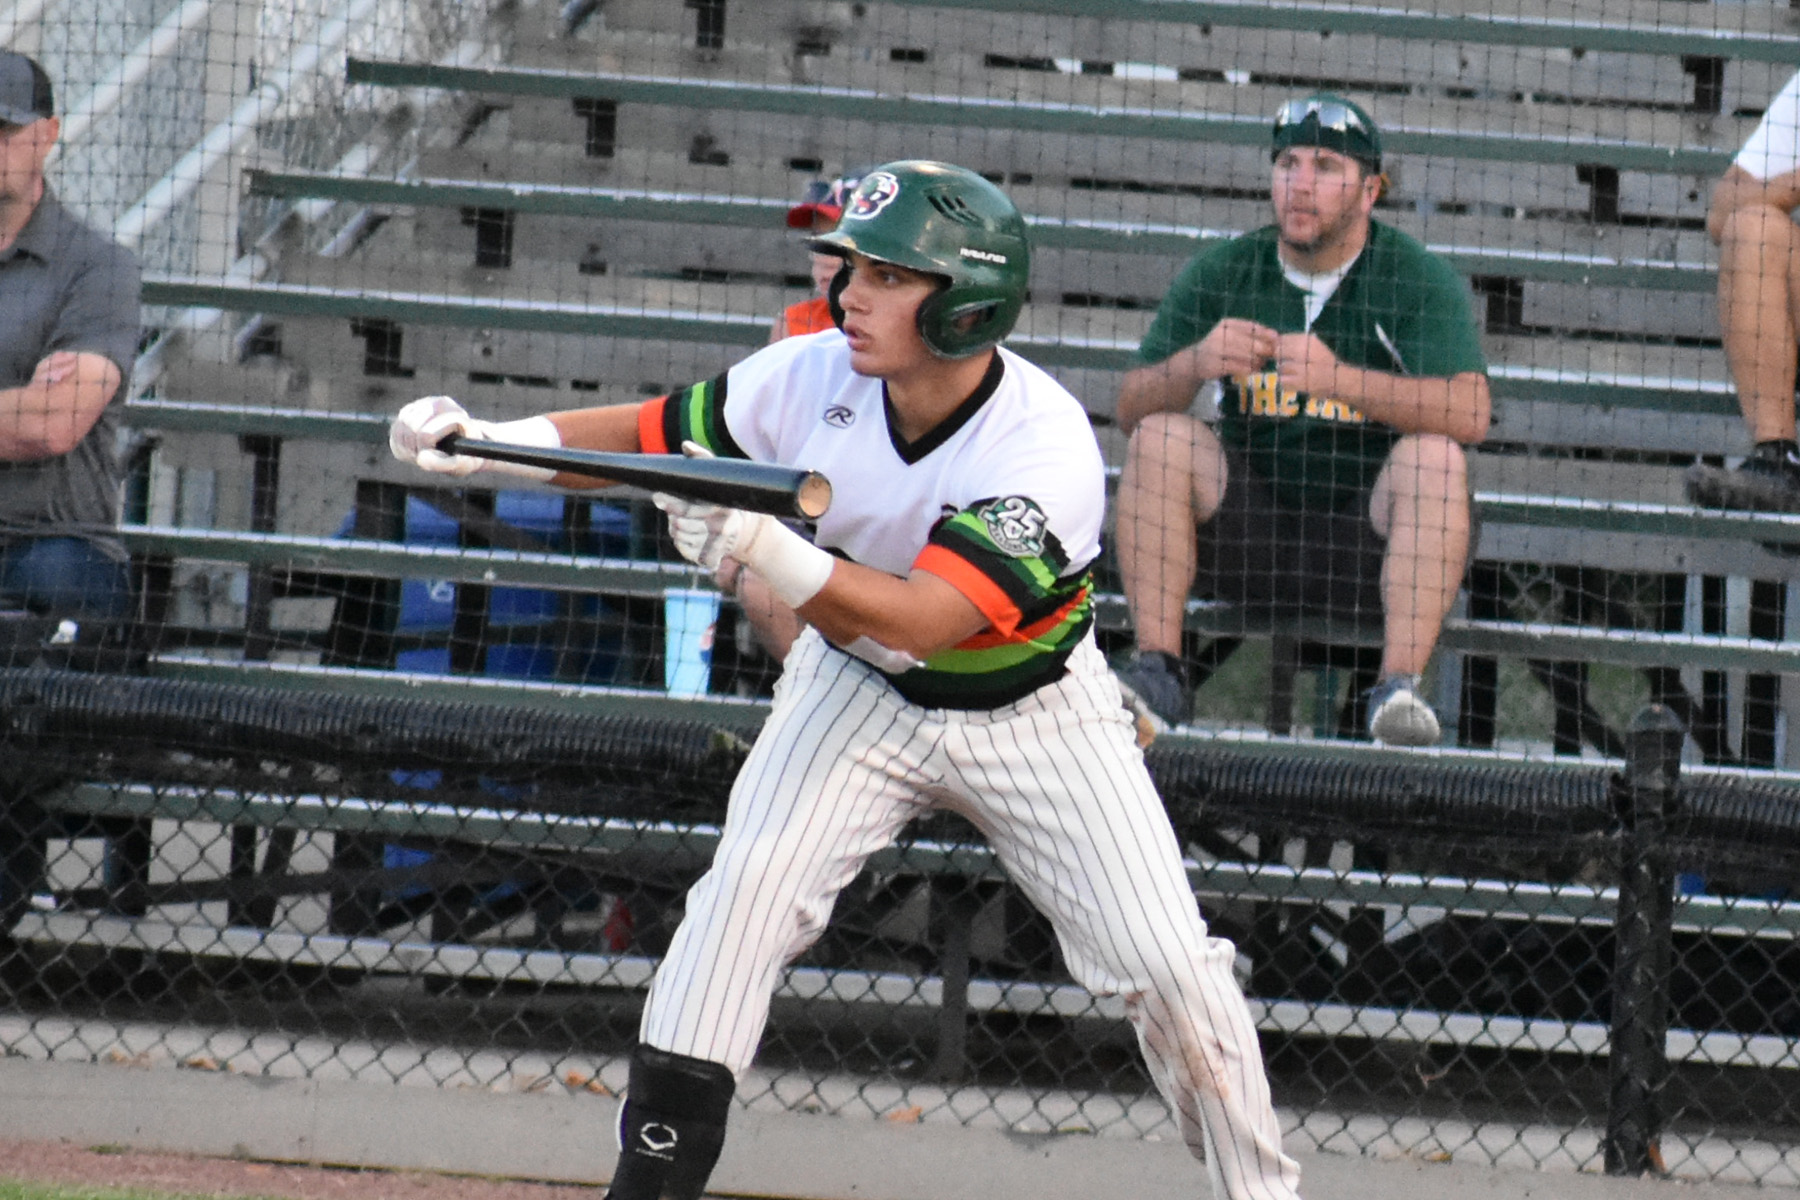 Despite late rally, Bullfrogs fall to Dock Spiders